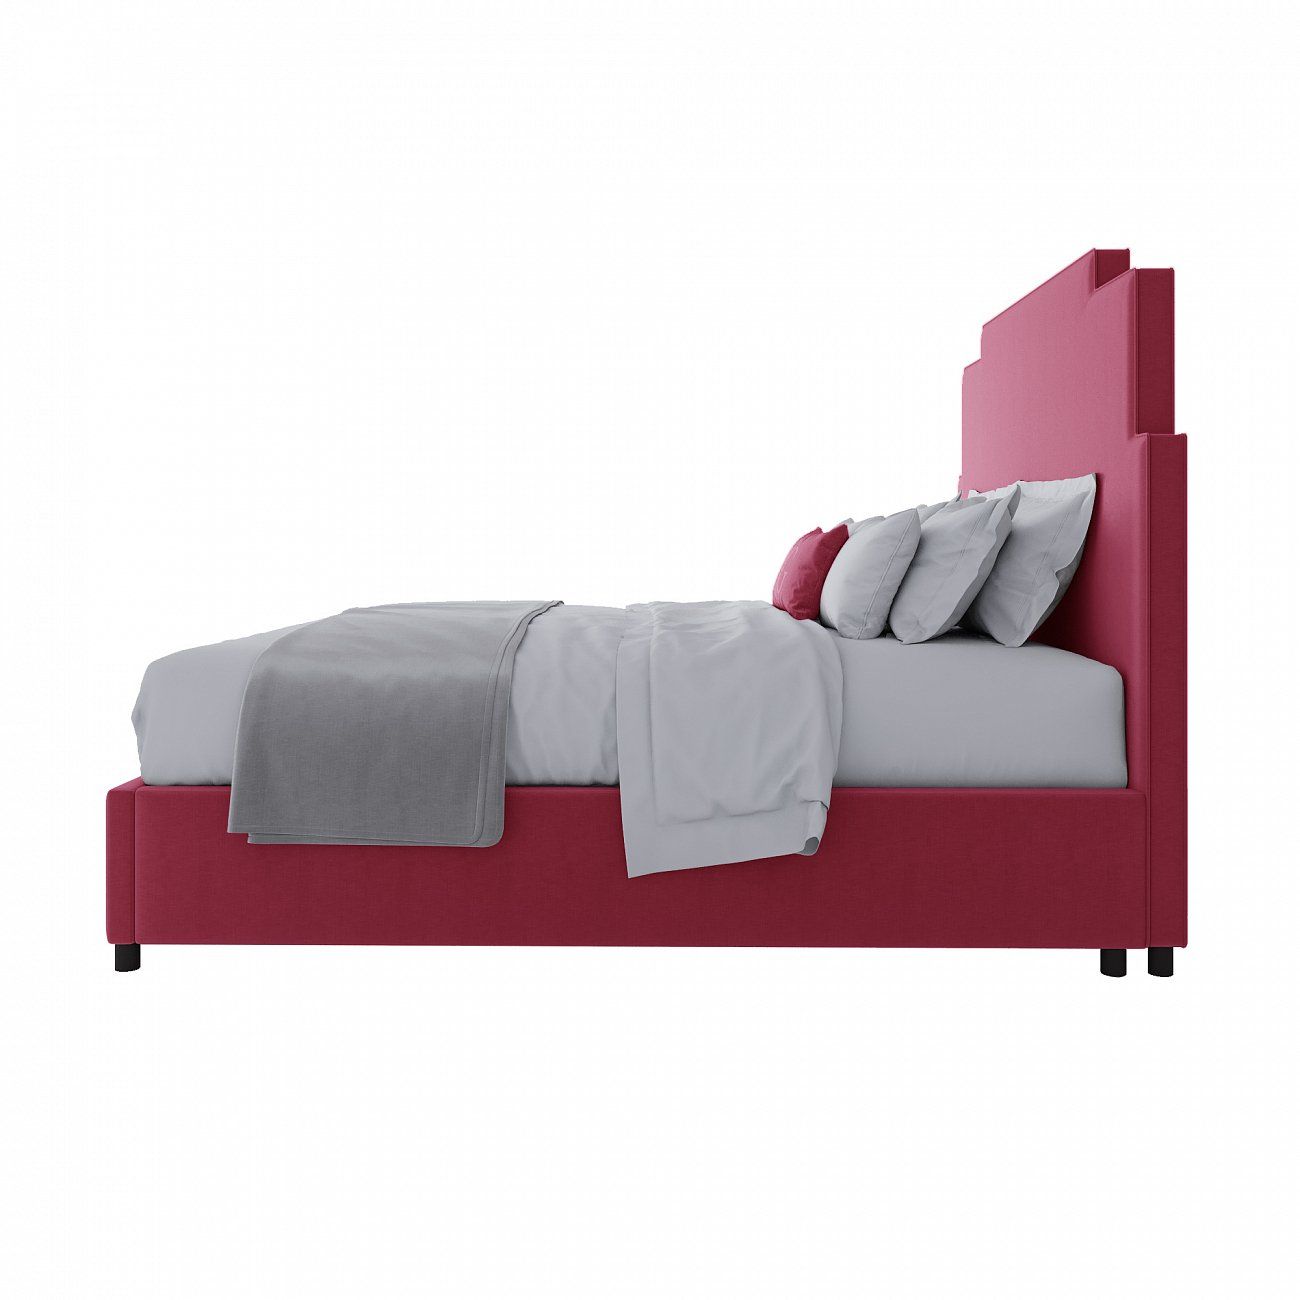 Double Bed 180x200 cm pink Paxton Bed Dusty Rose